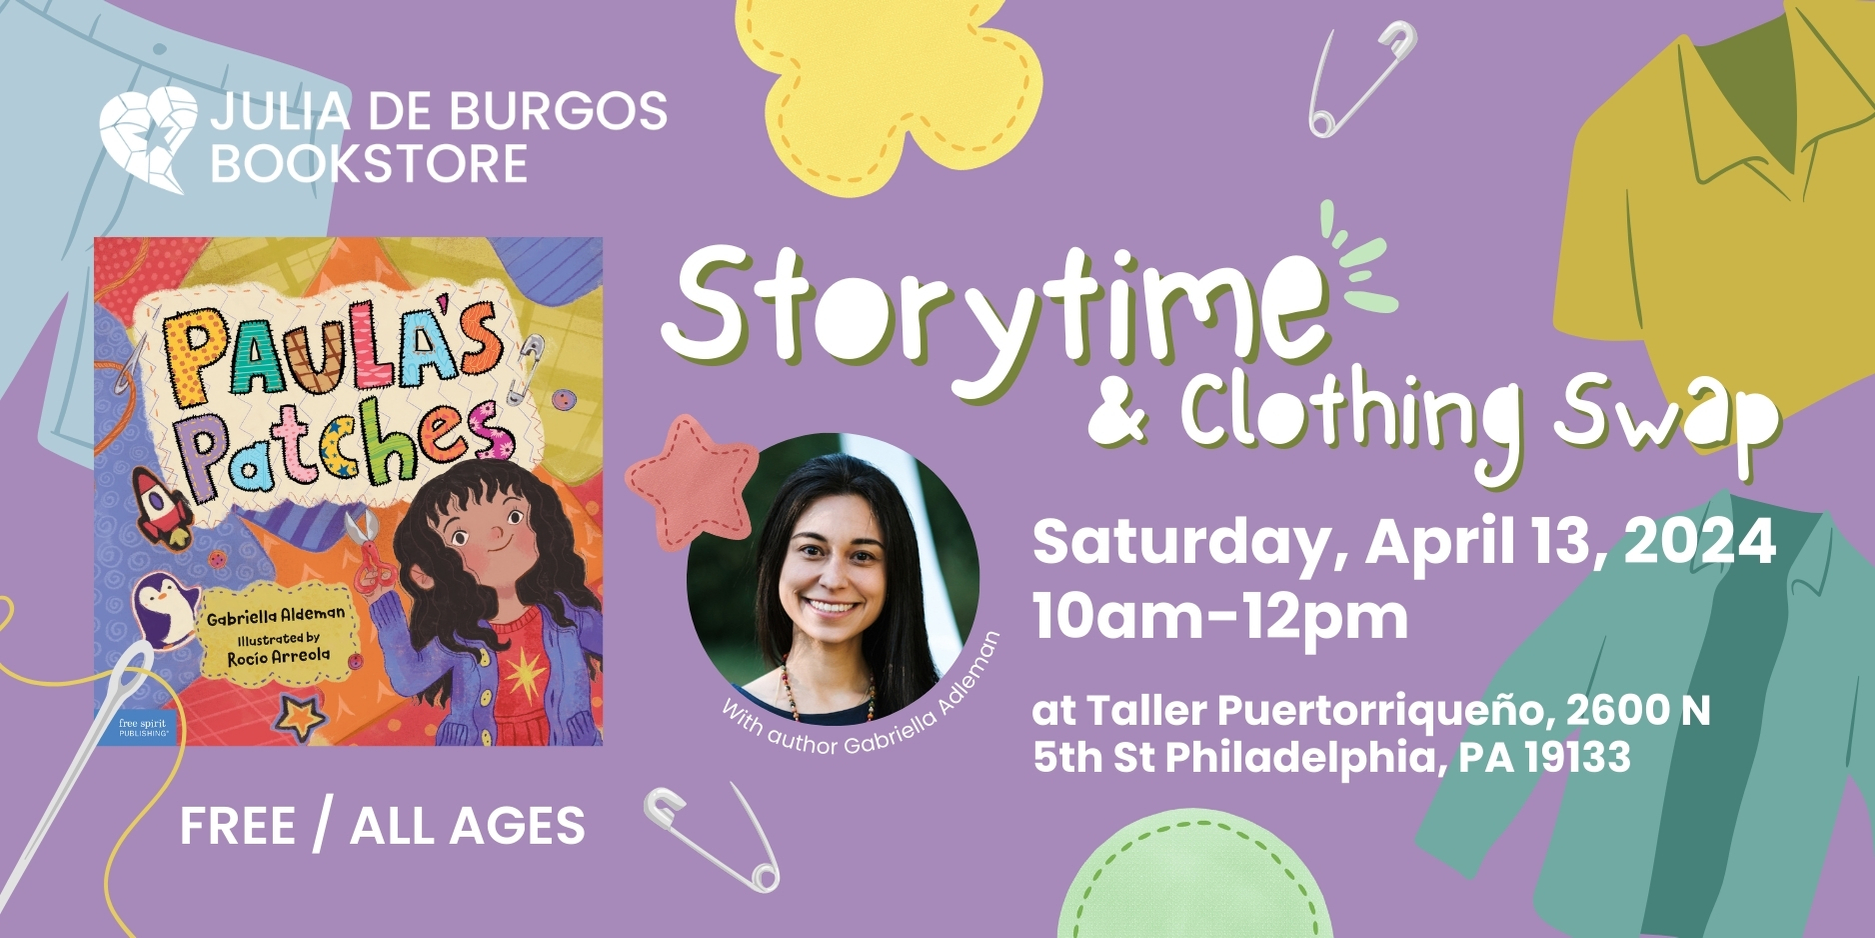 Storytime & Clothing Swap: Paula's Patches